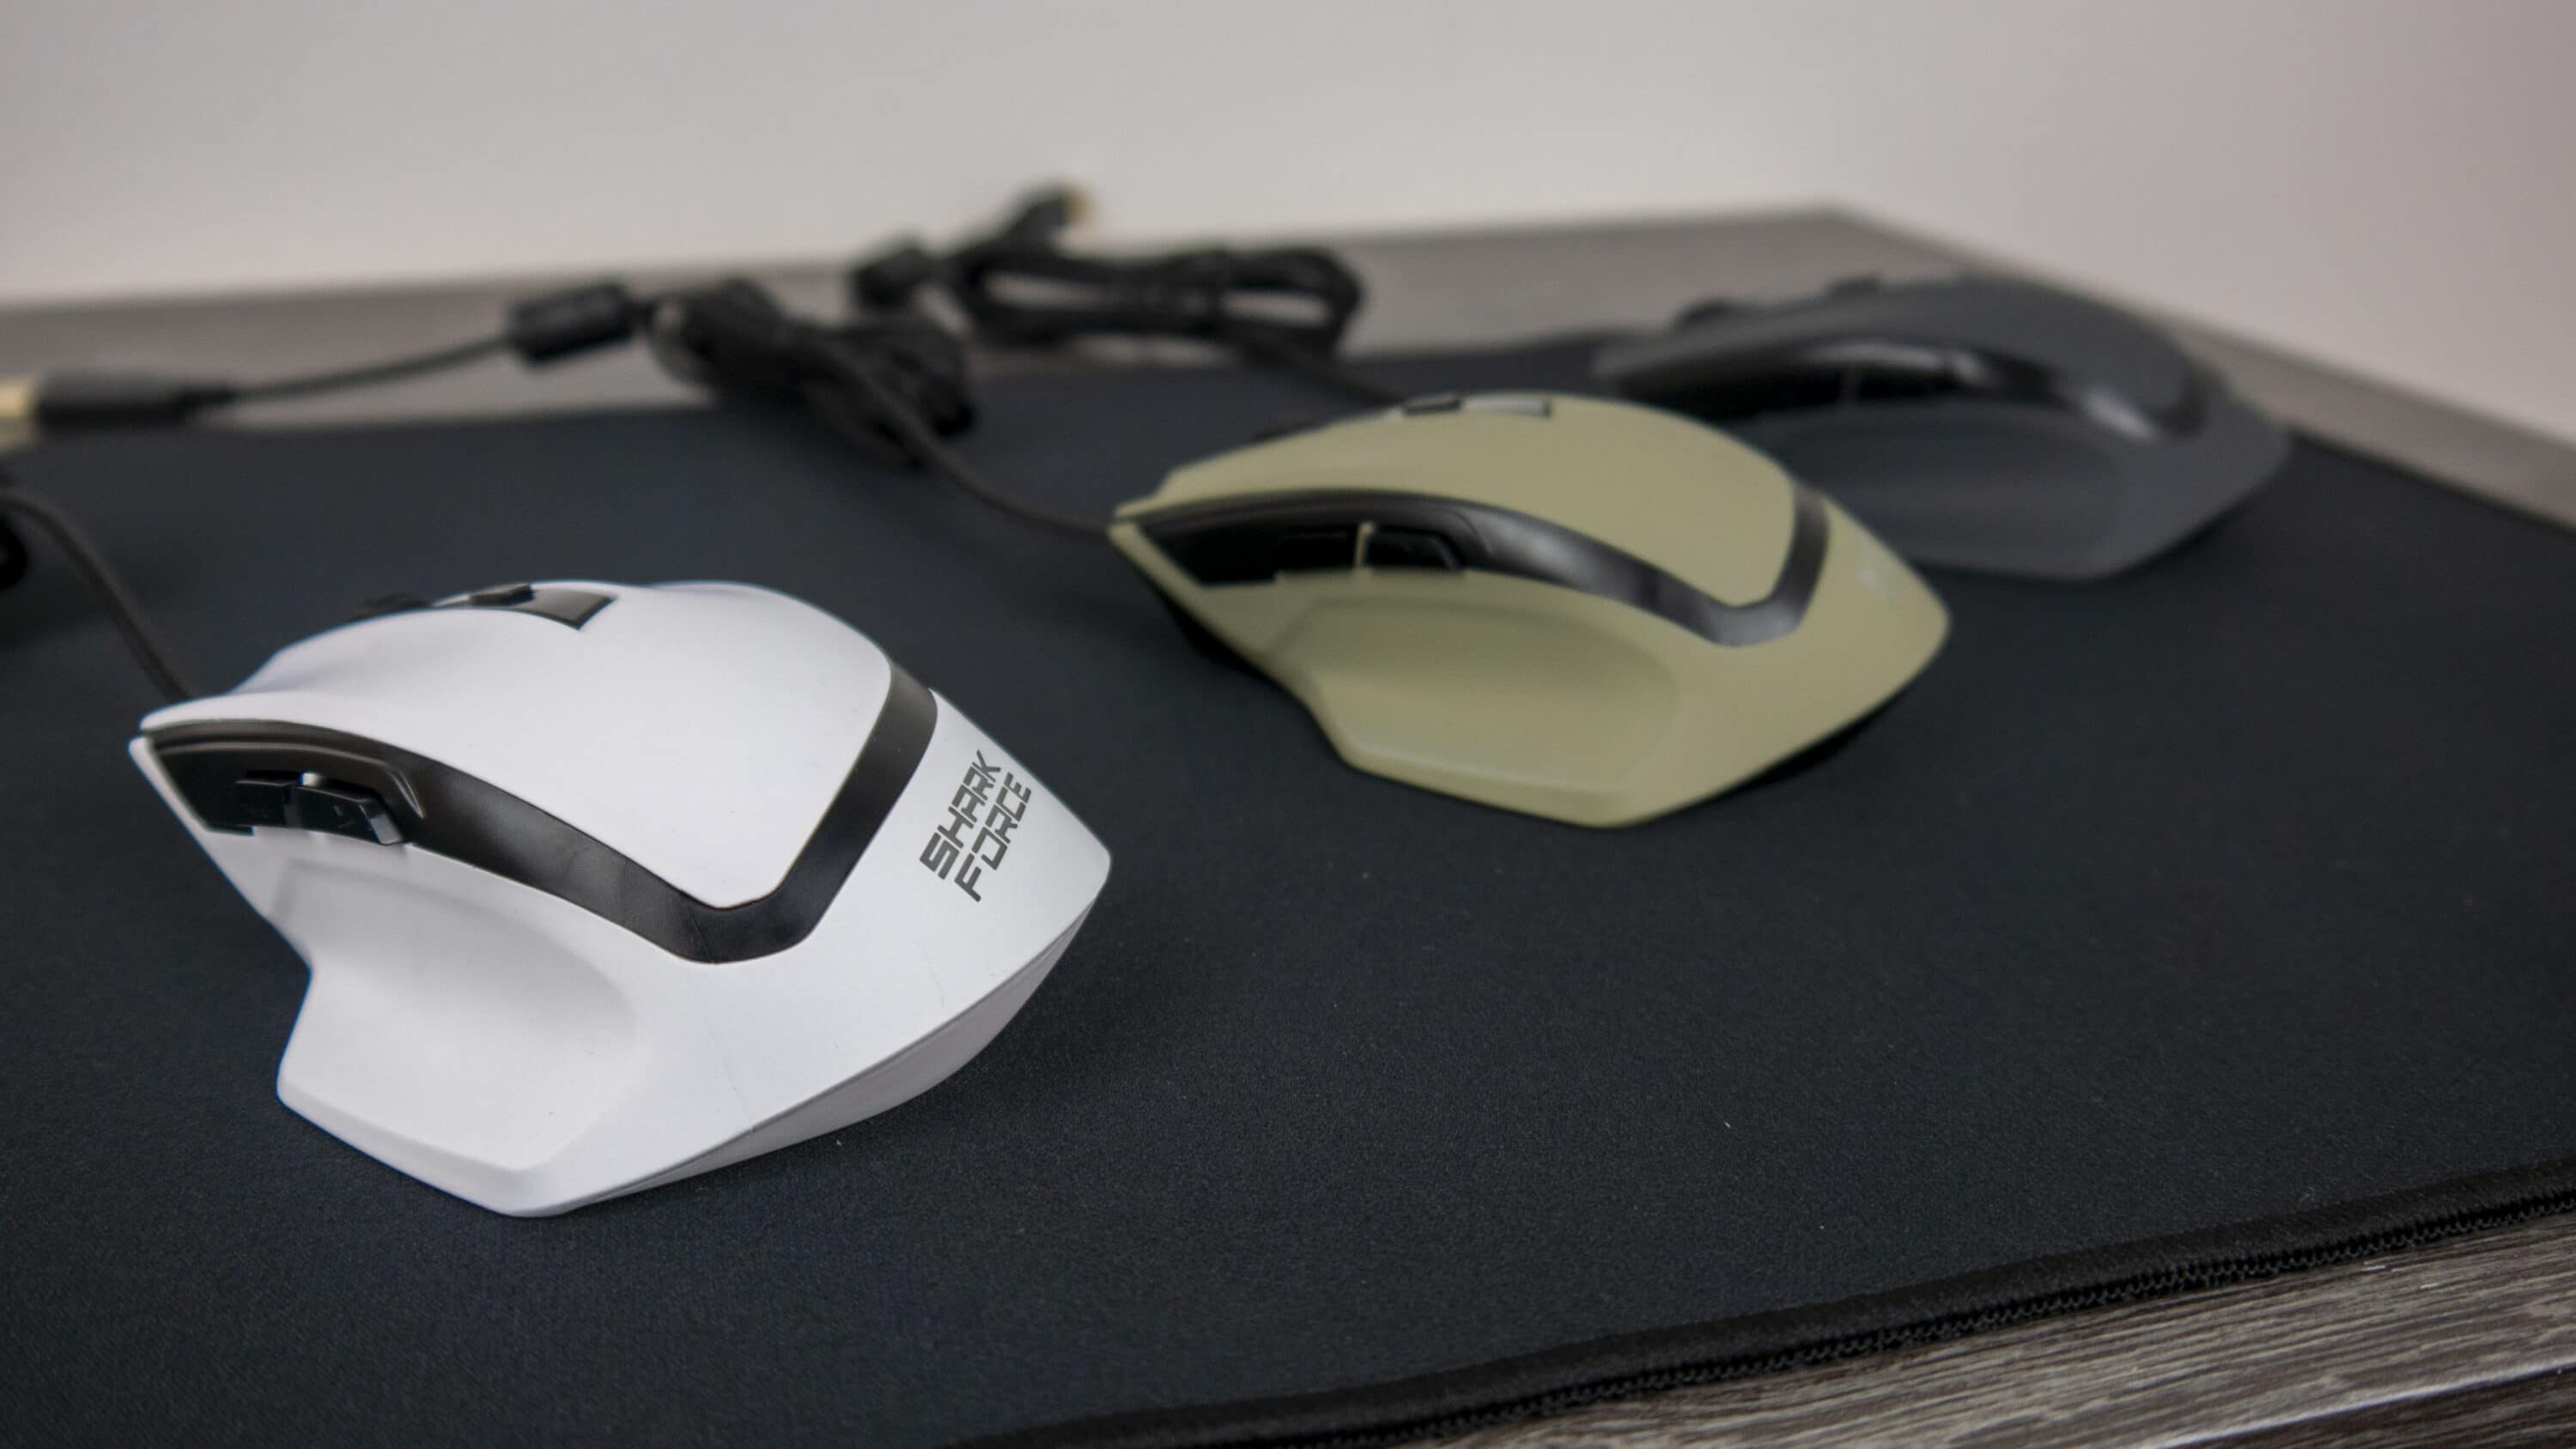 Cheap or low-priced? The Sharkoon Shark test gaming in mouse Force ll